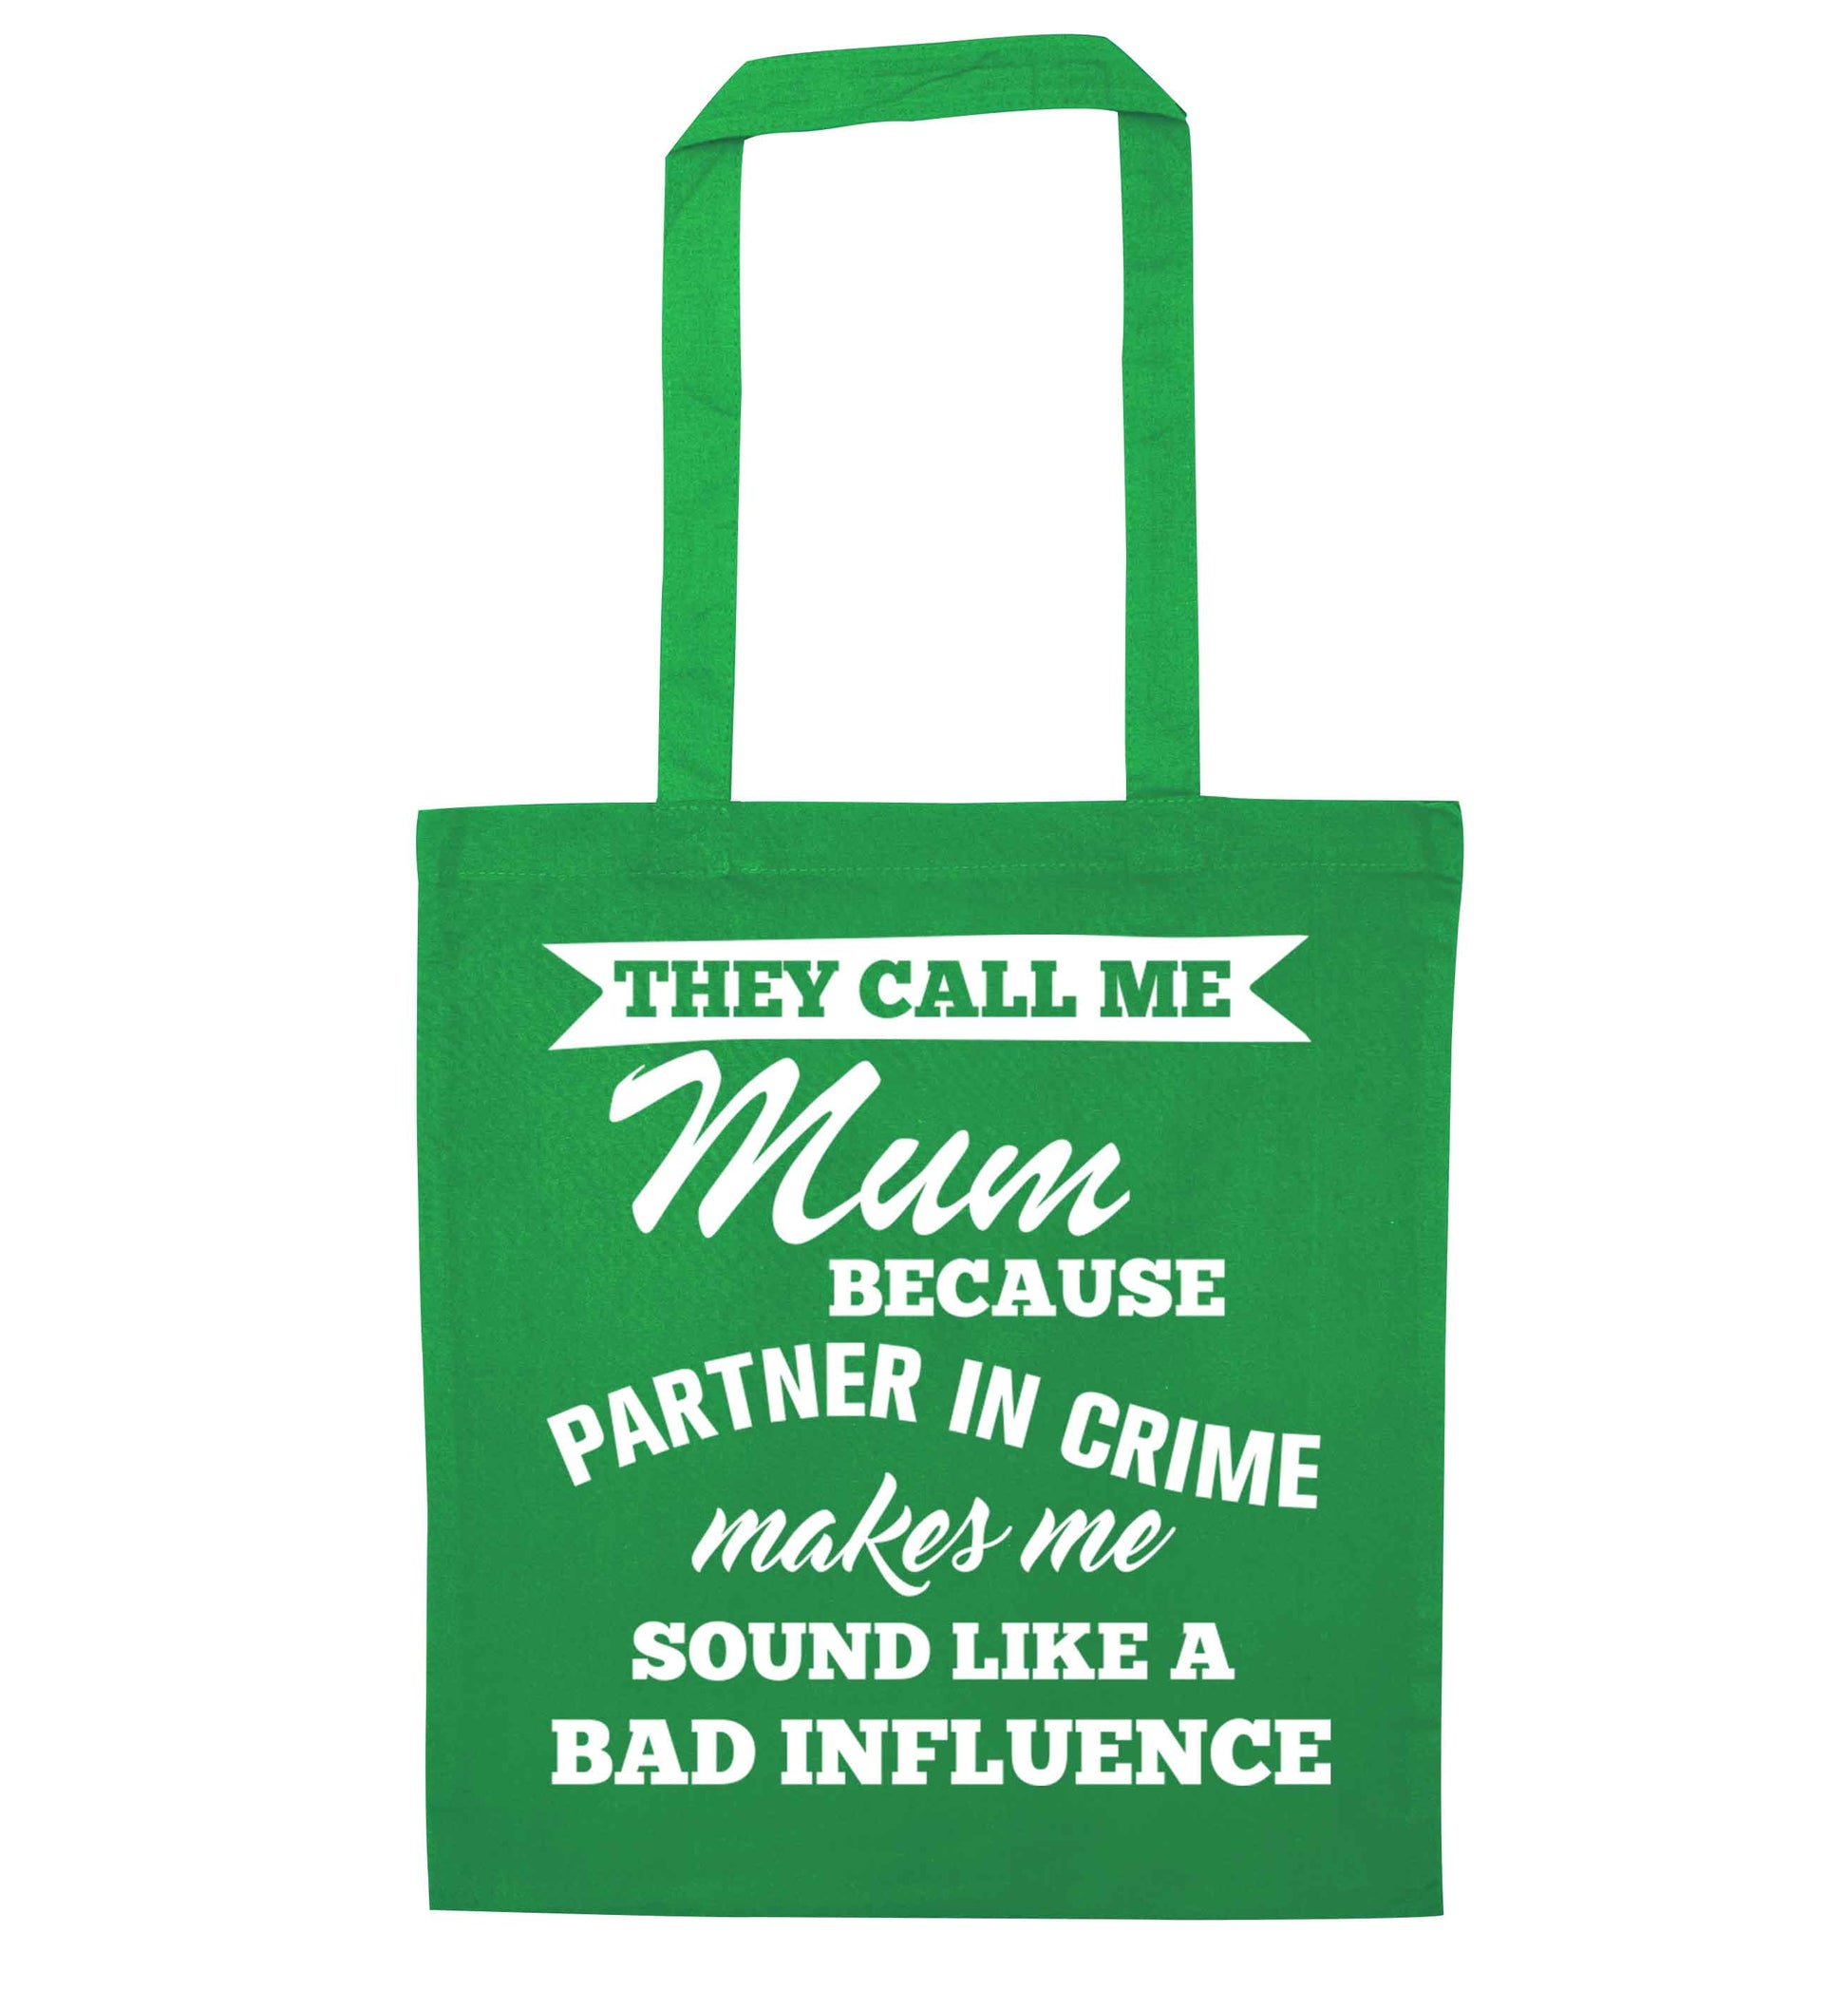 They call me mum because partner in crime makes me sound like a bad influence green tote bag